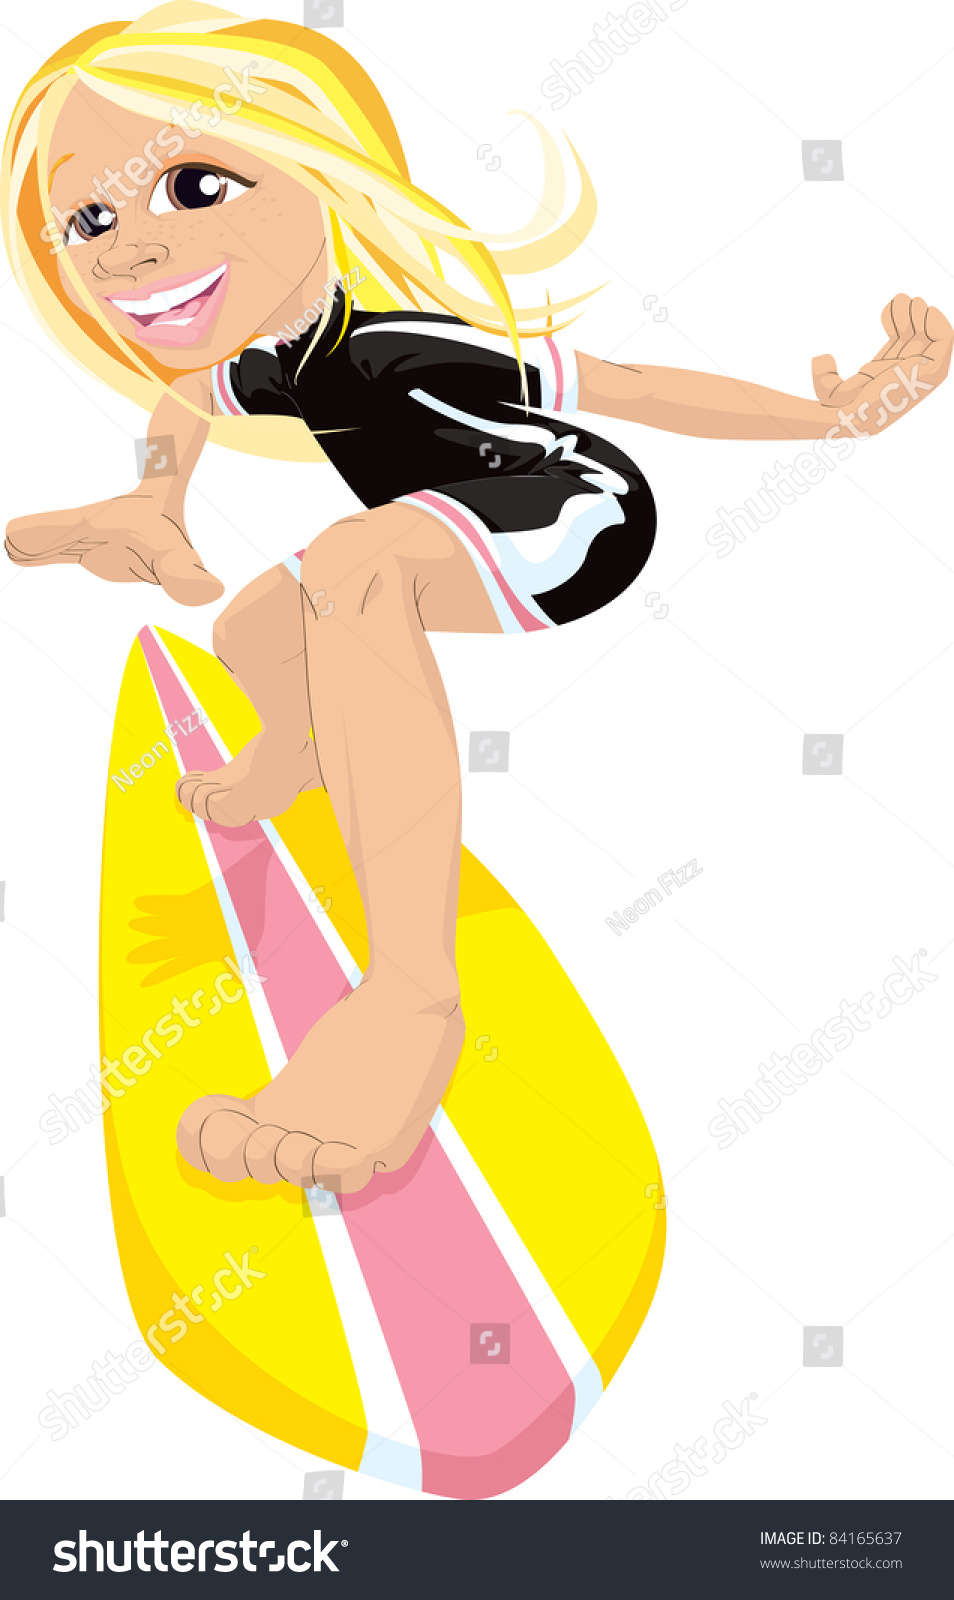 Character Illustration Of A Happy, Blond Female In An Active Surfing ...